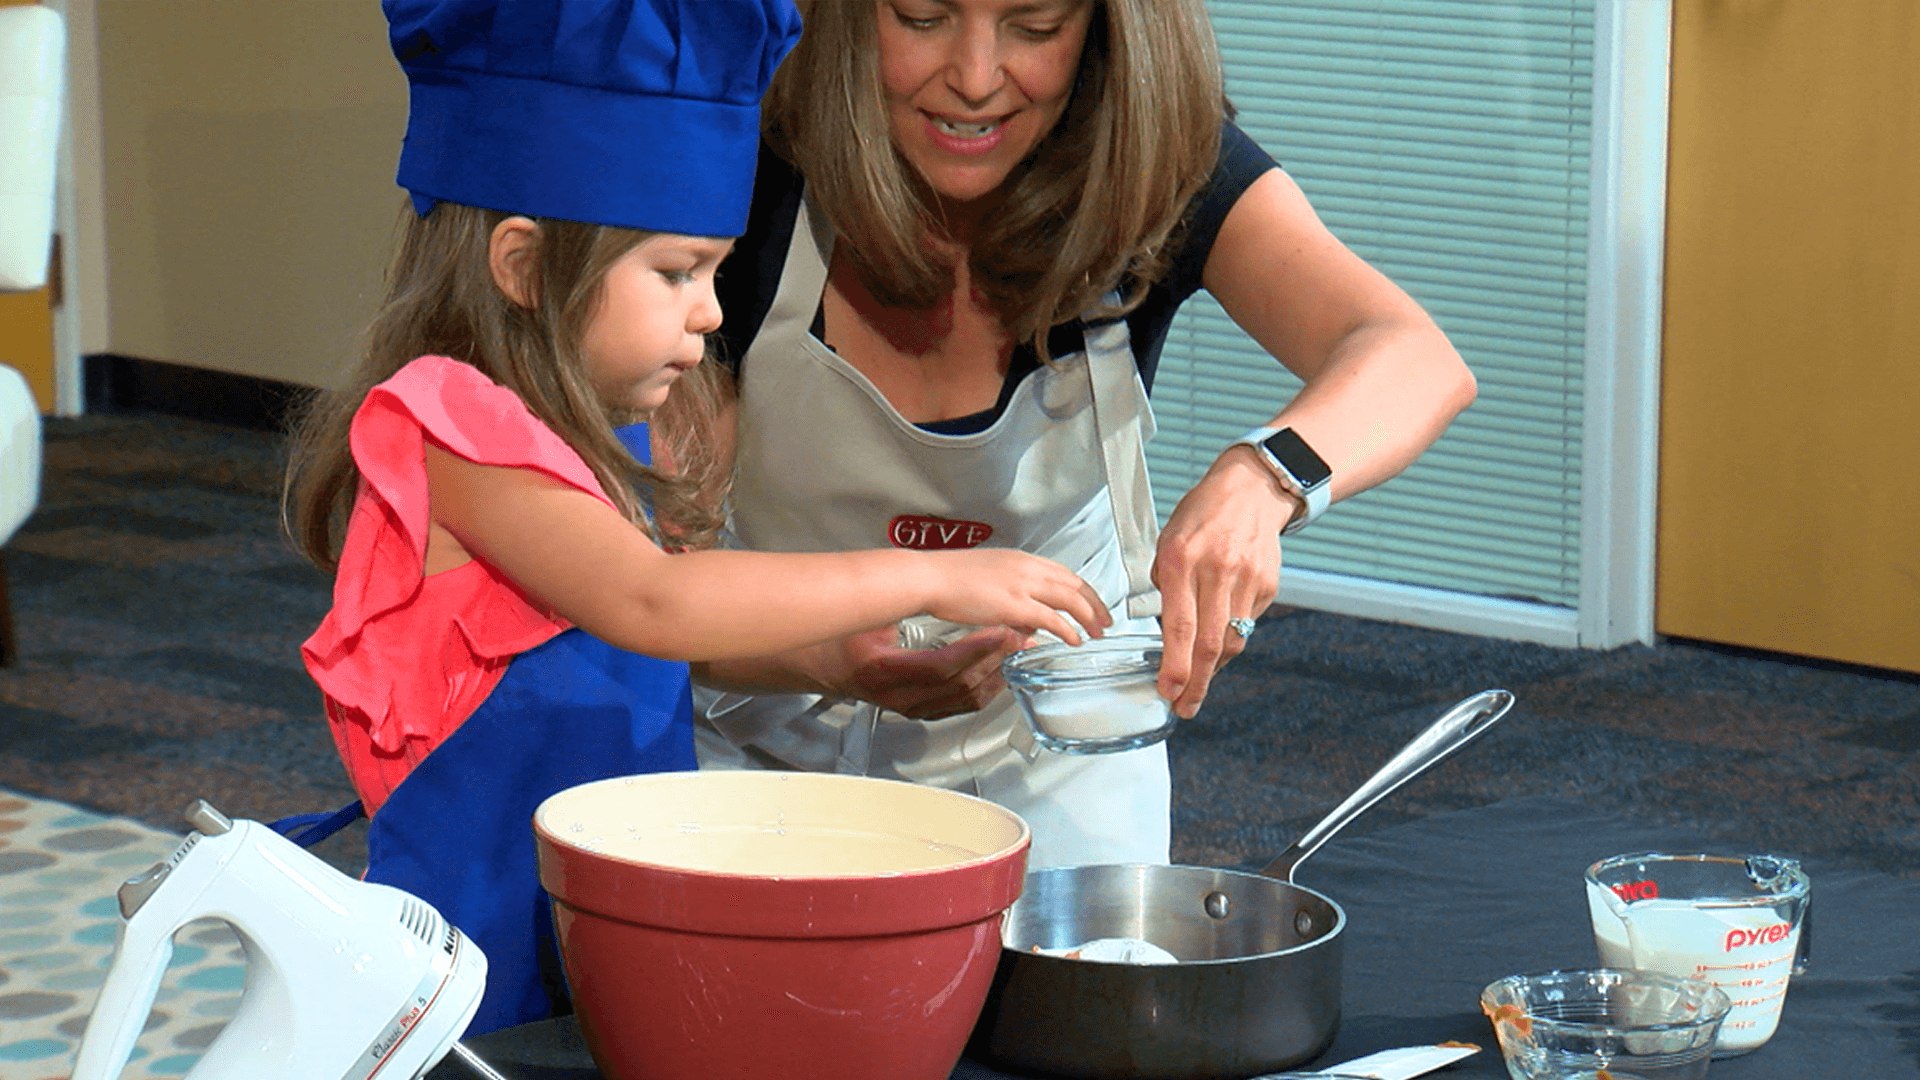 Cooking & Baking with Your Kids is a Great Way to Bond